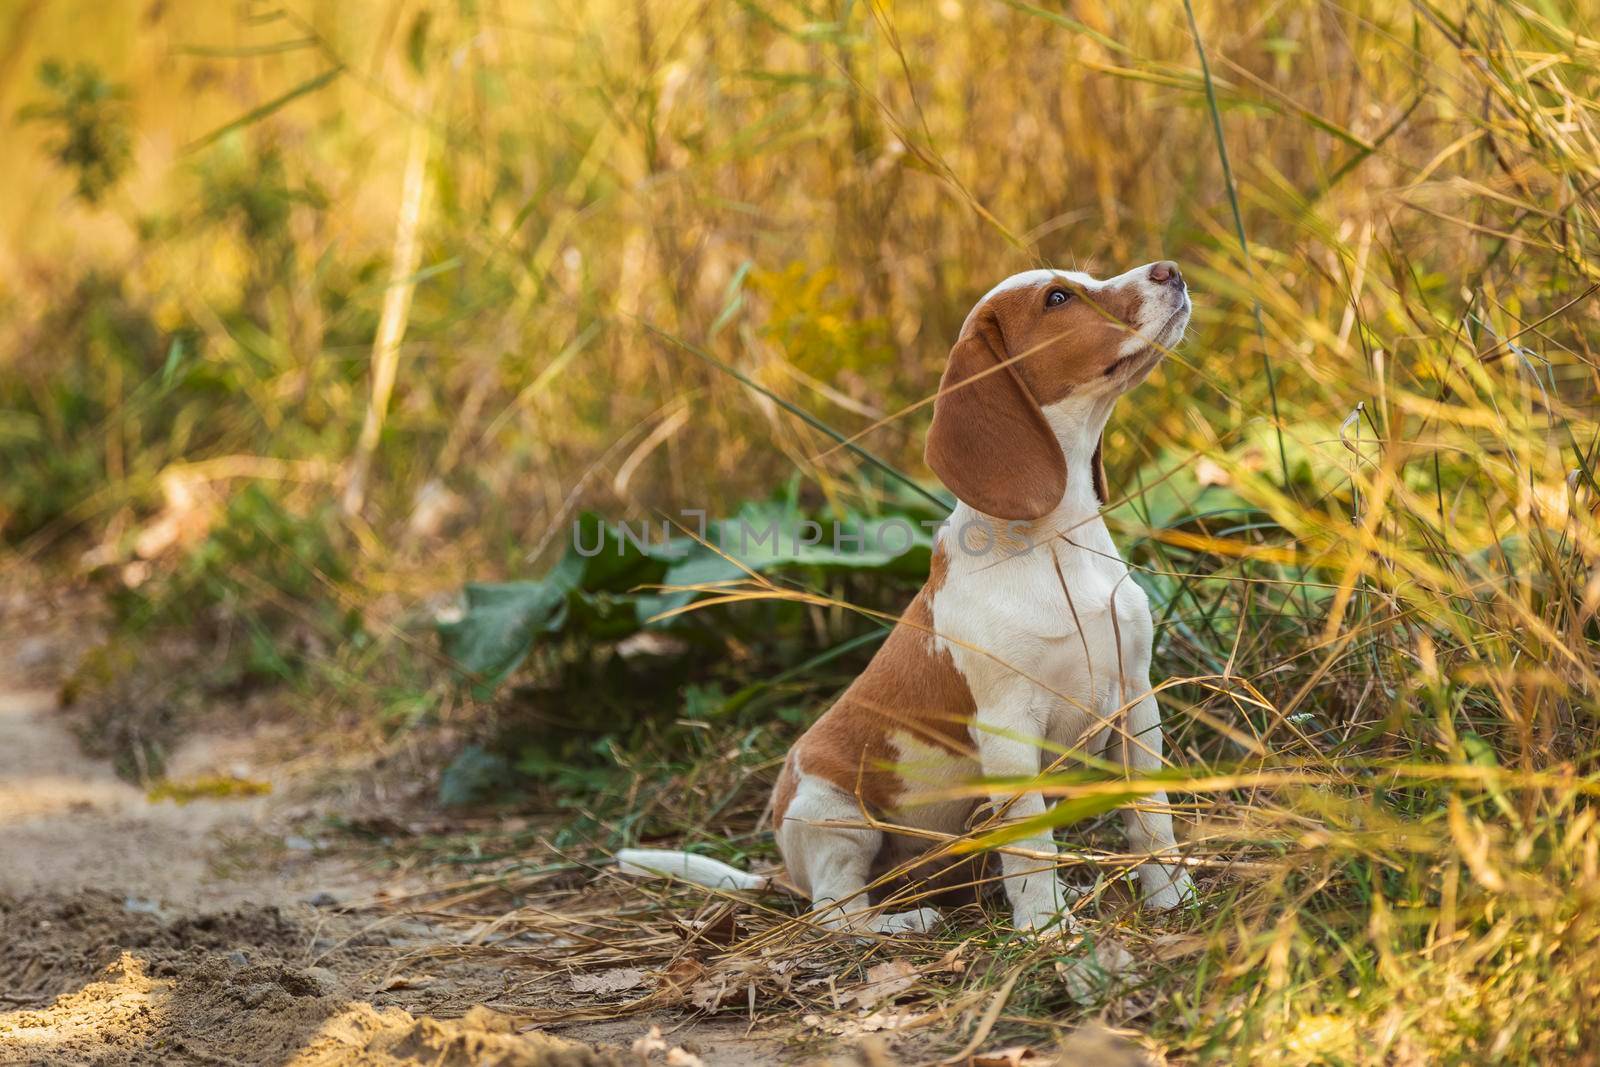 Beagle dog walking in nature by zokov